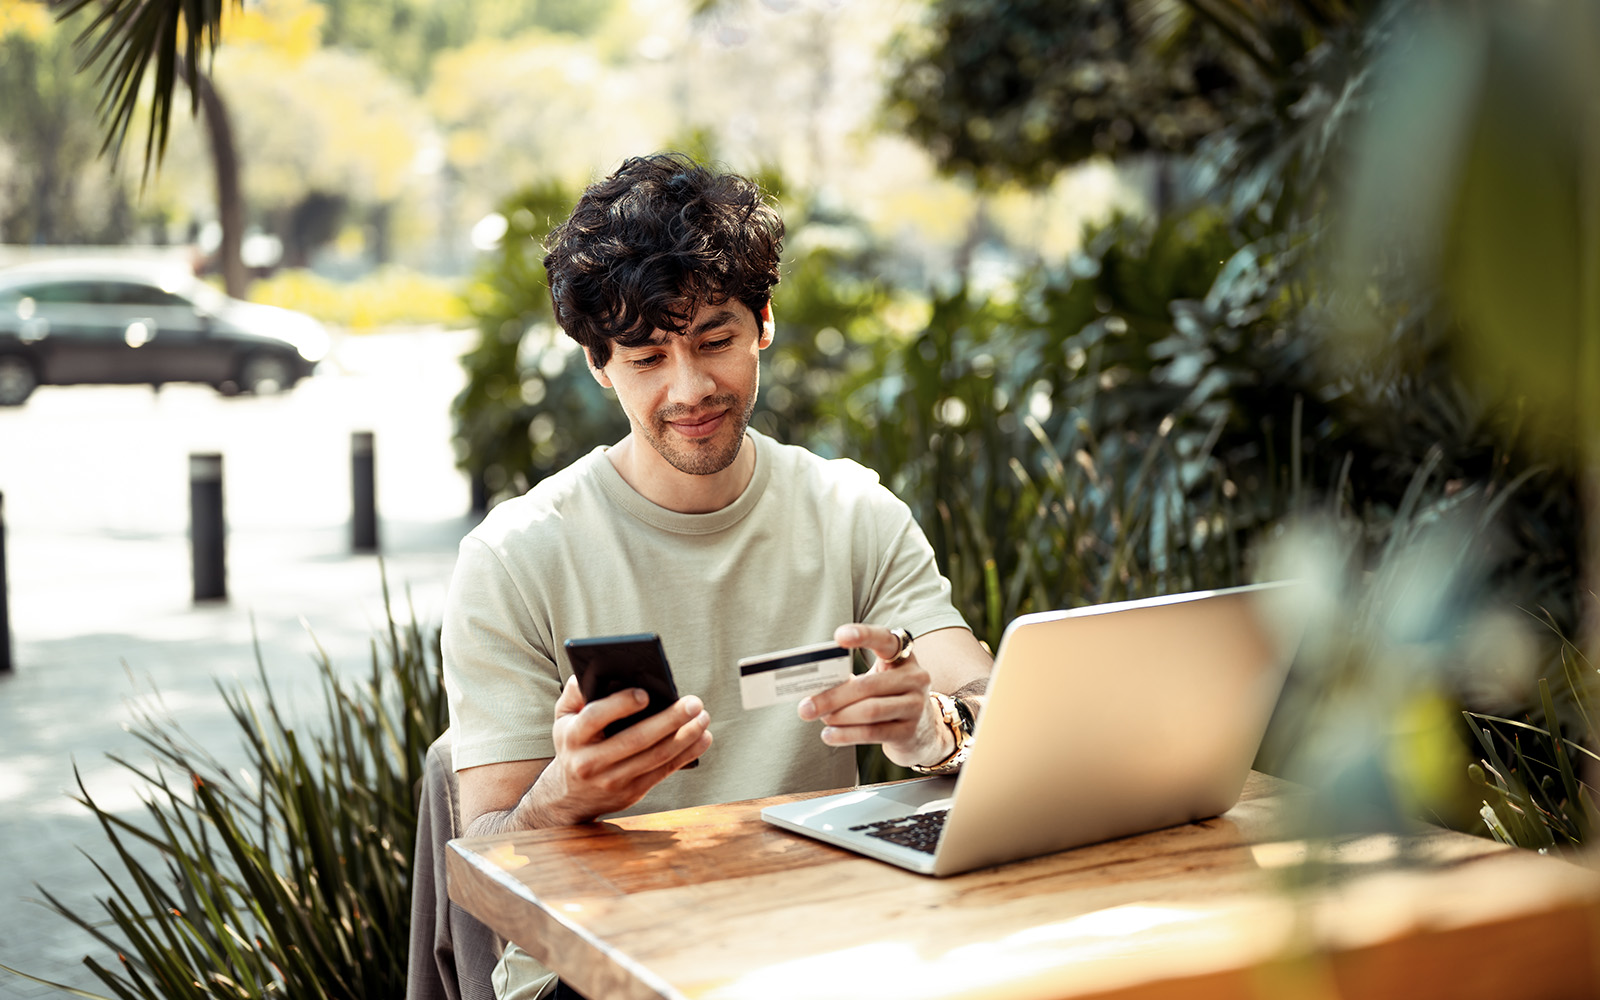 A man sitting at an outdoor table with a laptop, looking at his phone and credit card, as if about to use some form of online marketplace